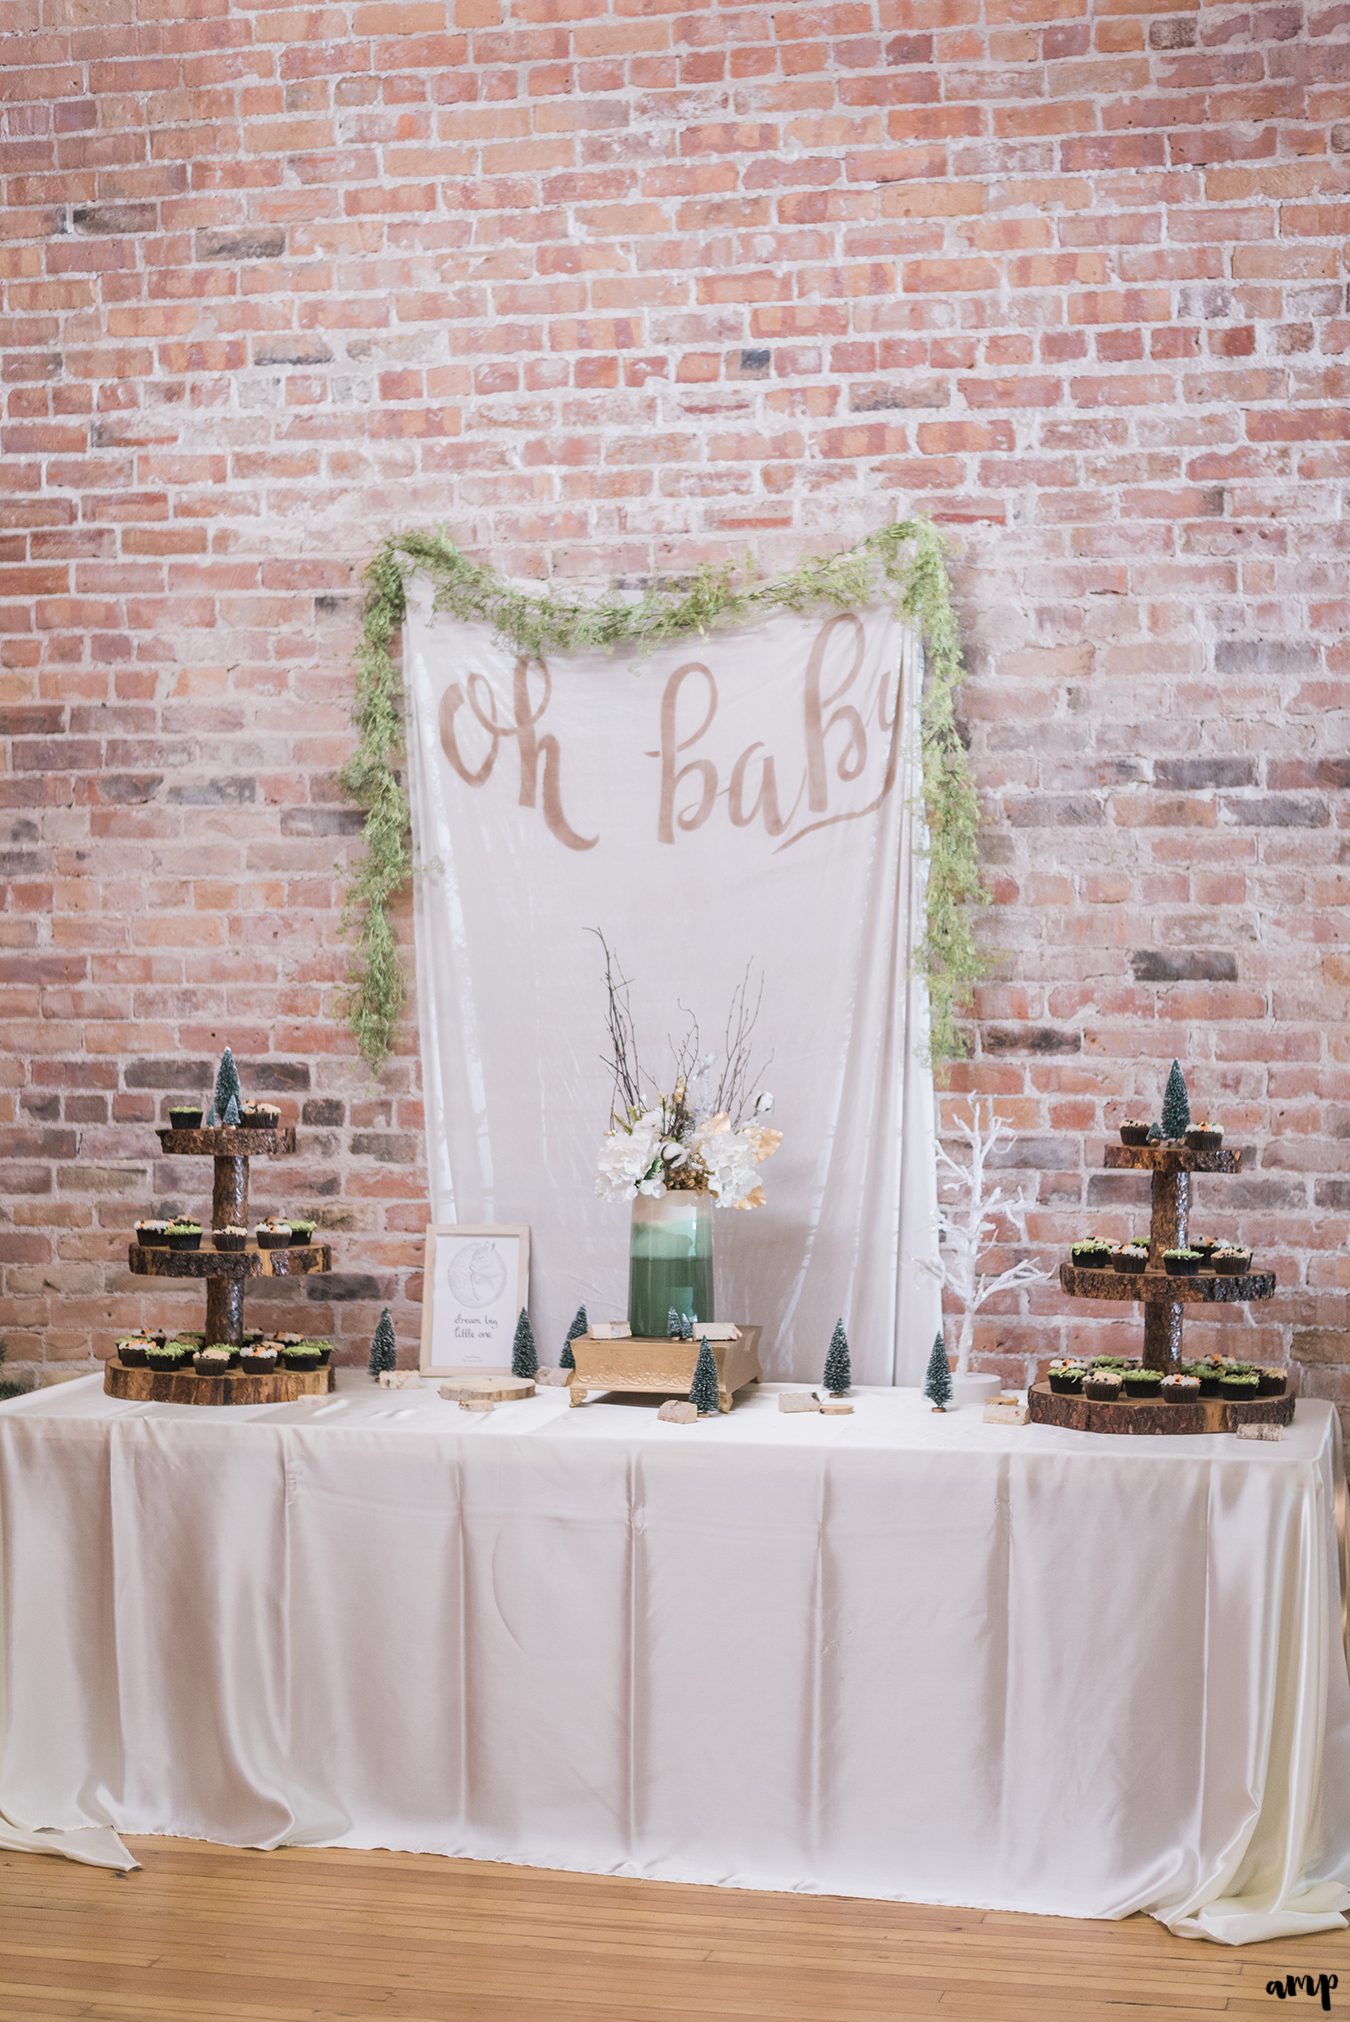 "Oh baby" banner and dessert table